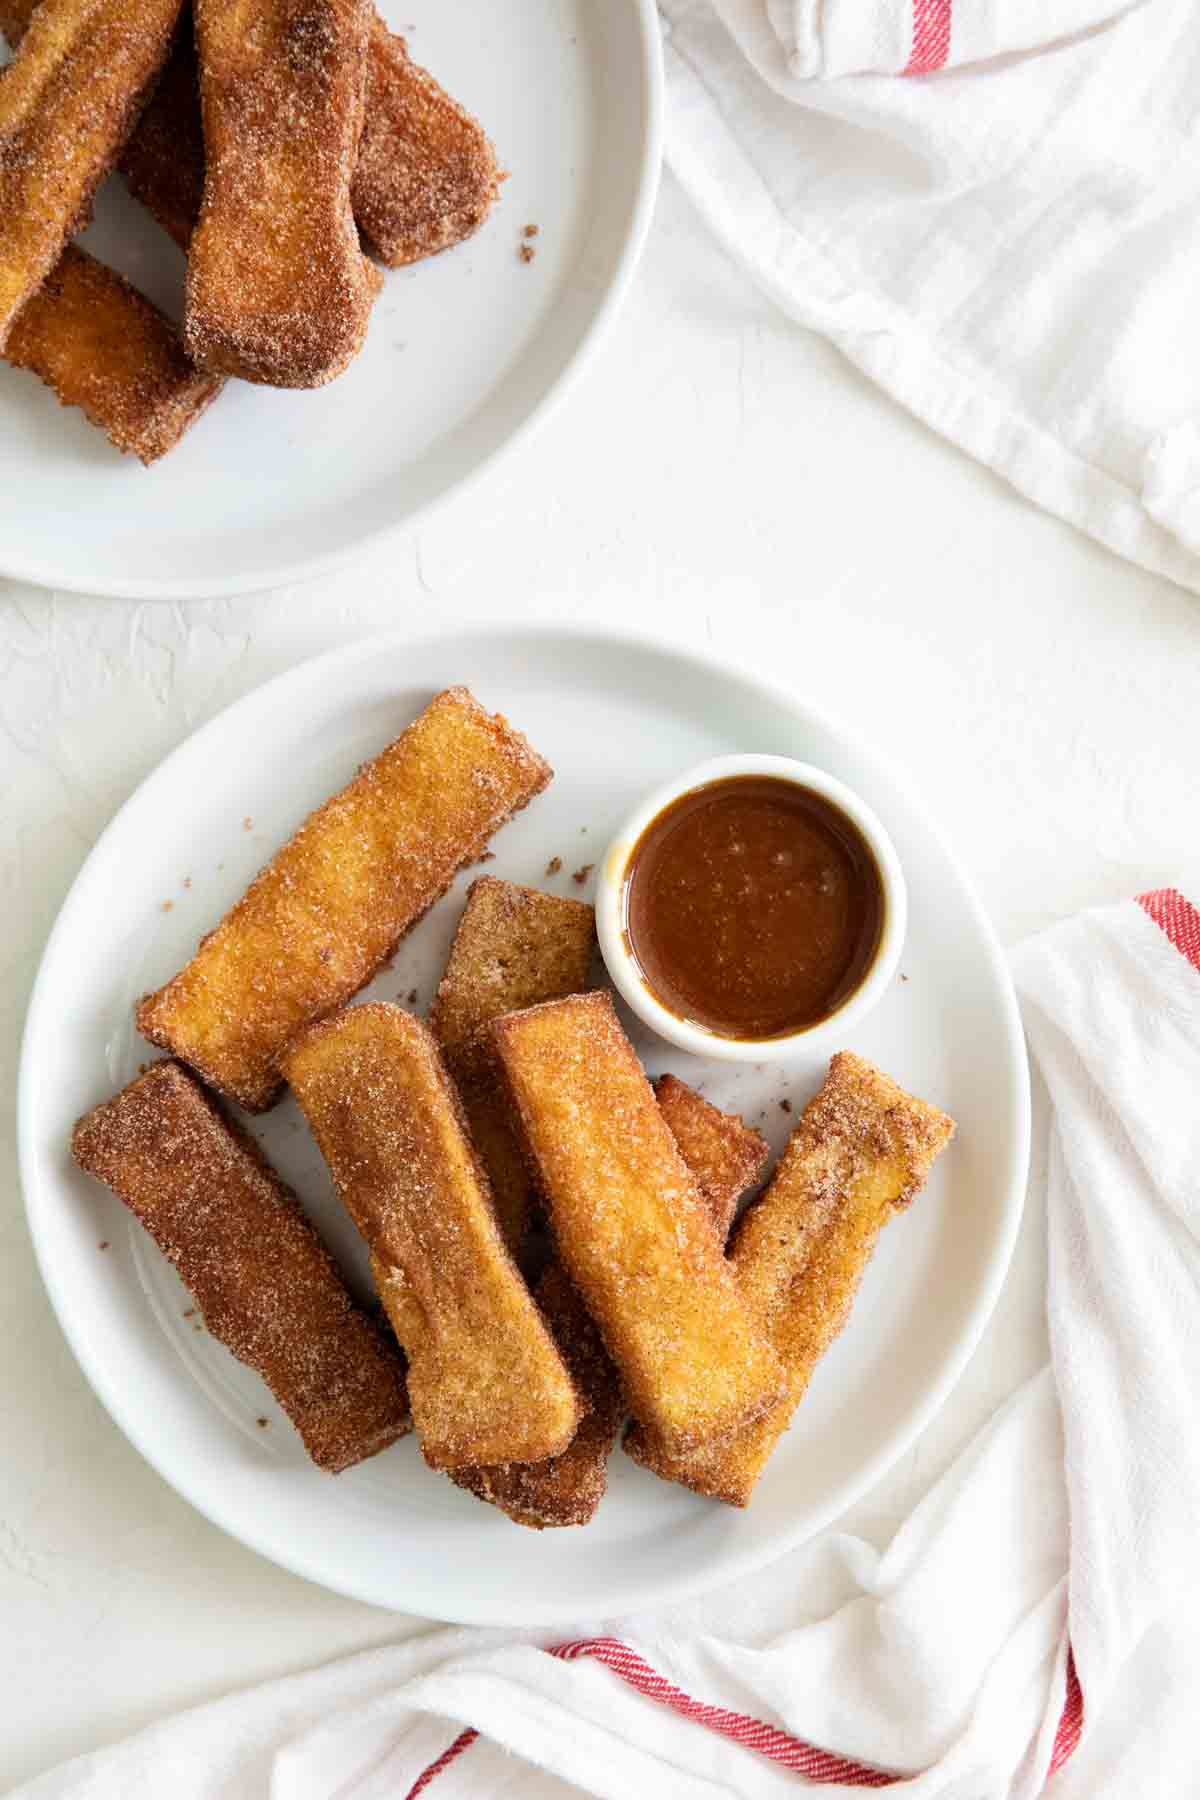 Plates with cinnamon sugar covered French Toast Sticks.